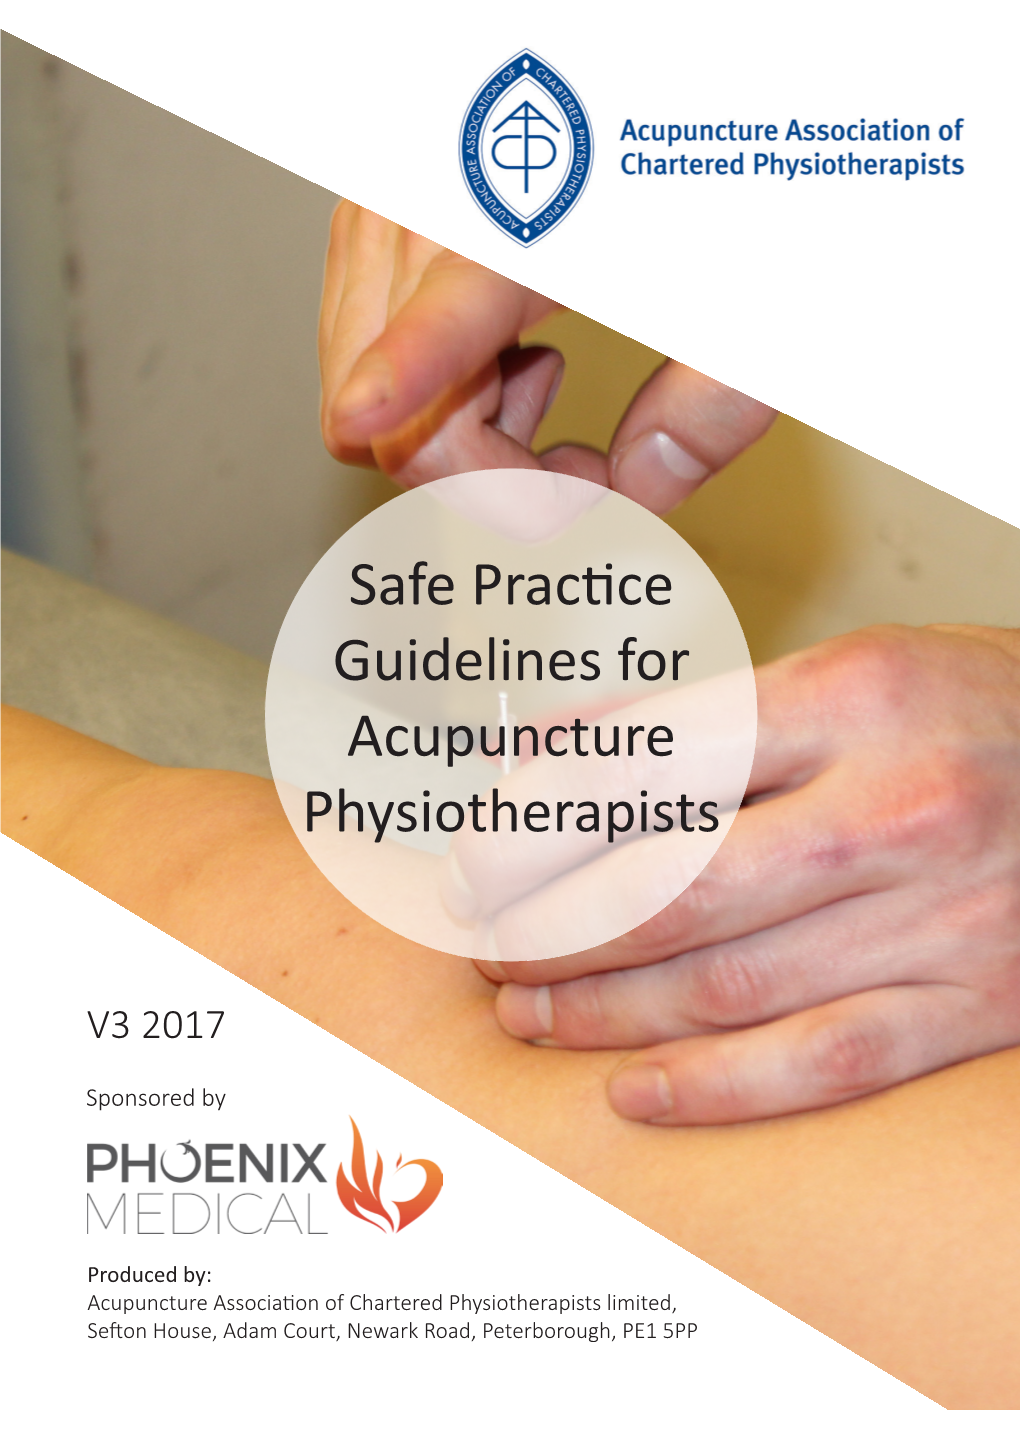 Safe Practice Guidelines for Acupuncture Physiotherapists